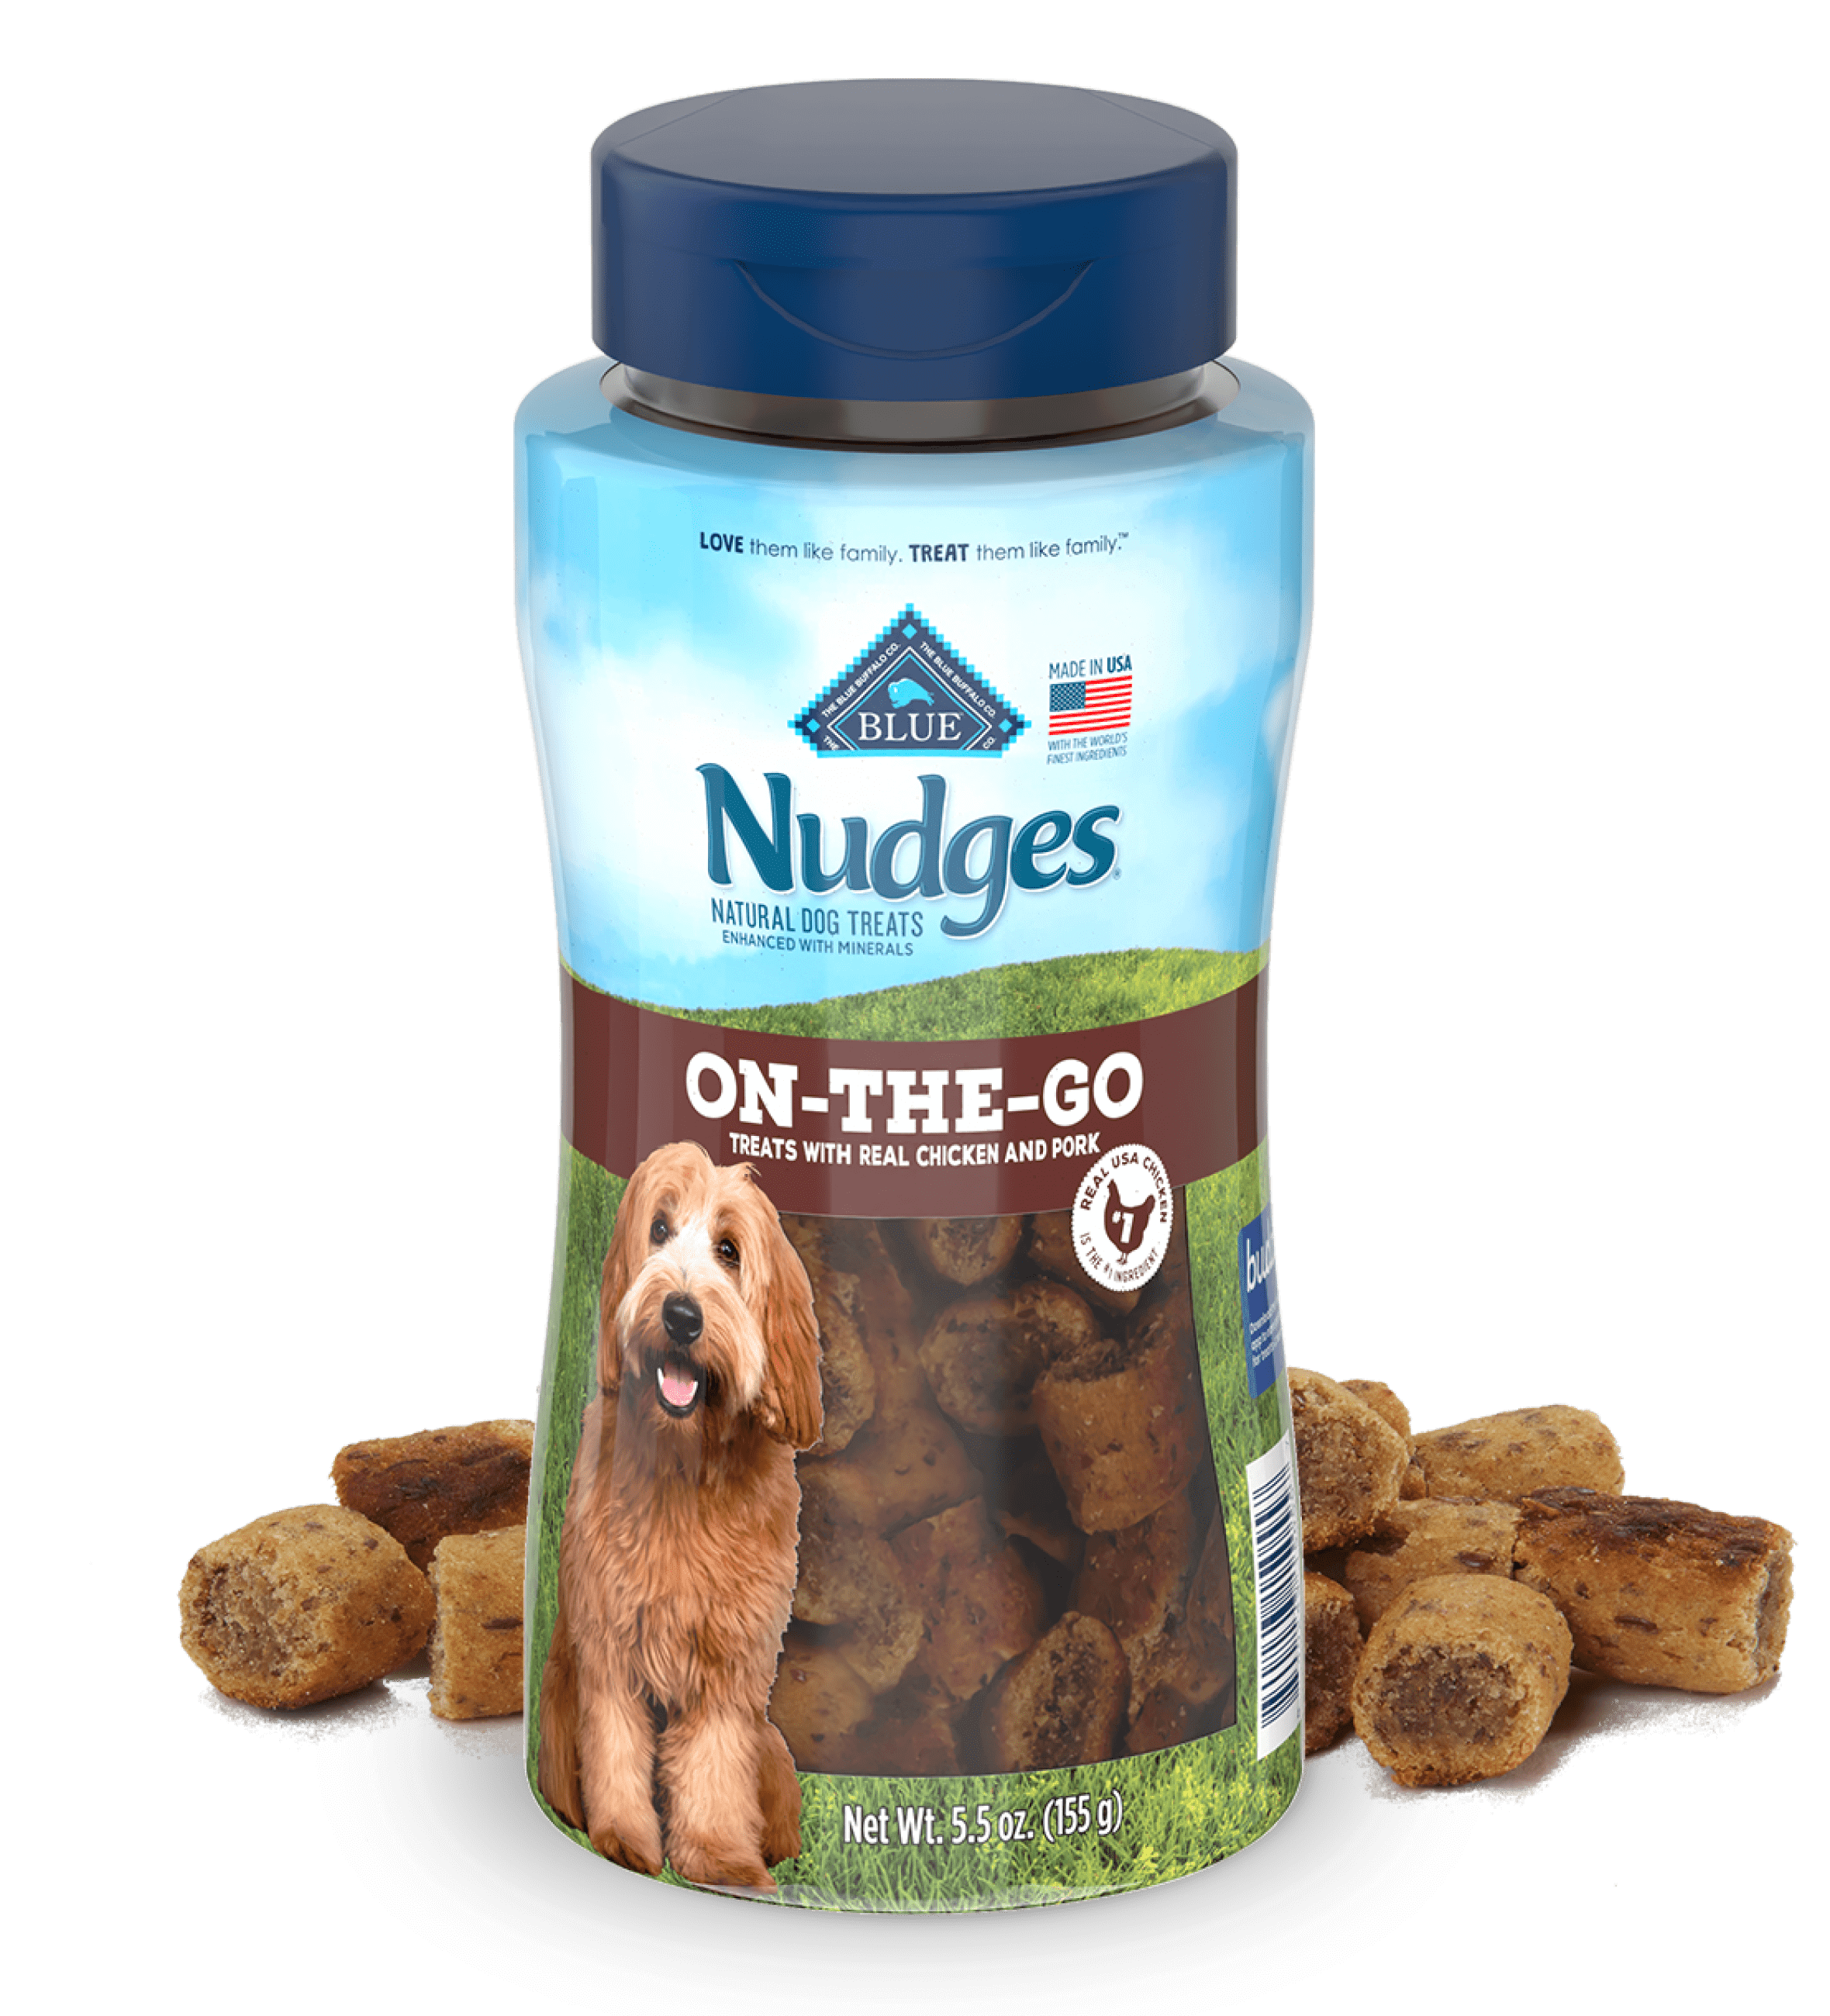 on-the-go treats with real chicken and pork with real chicken and pork dog treats